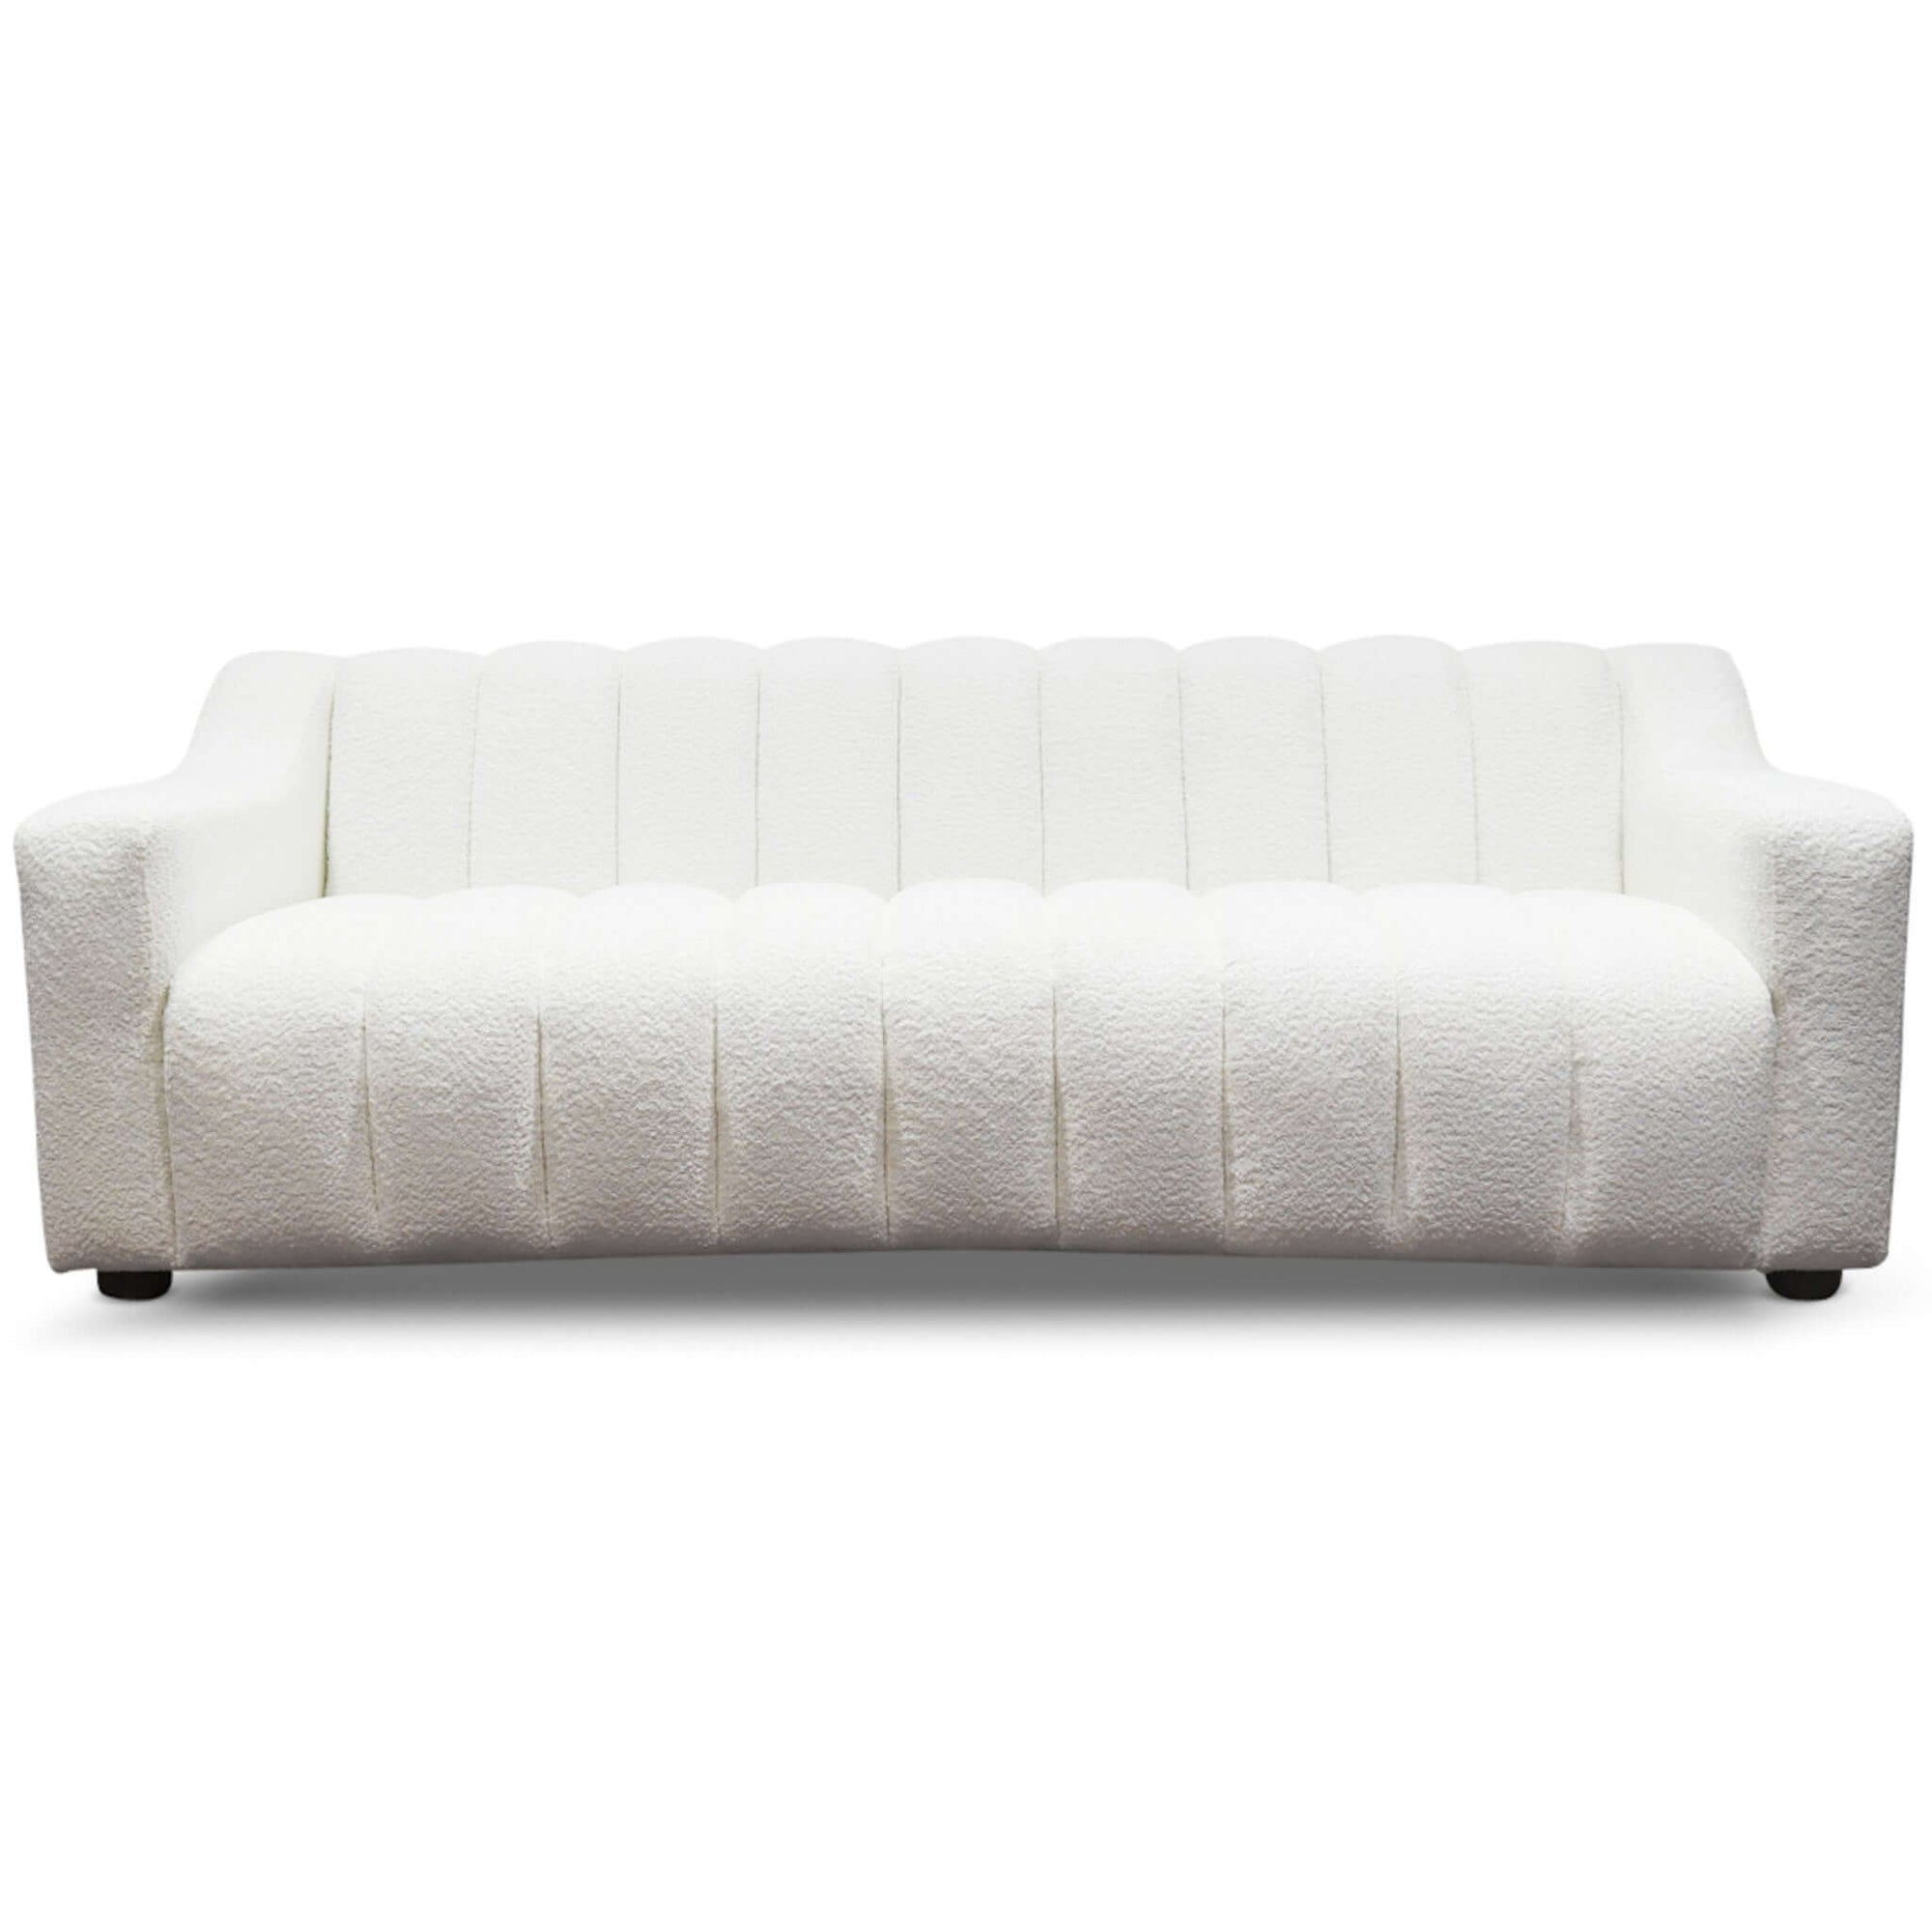 Ashcroft Imports Marcus  Luxury Tight Back Cream Boucle Couch